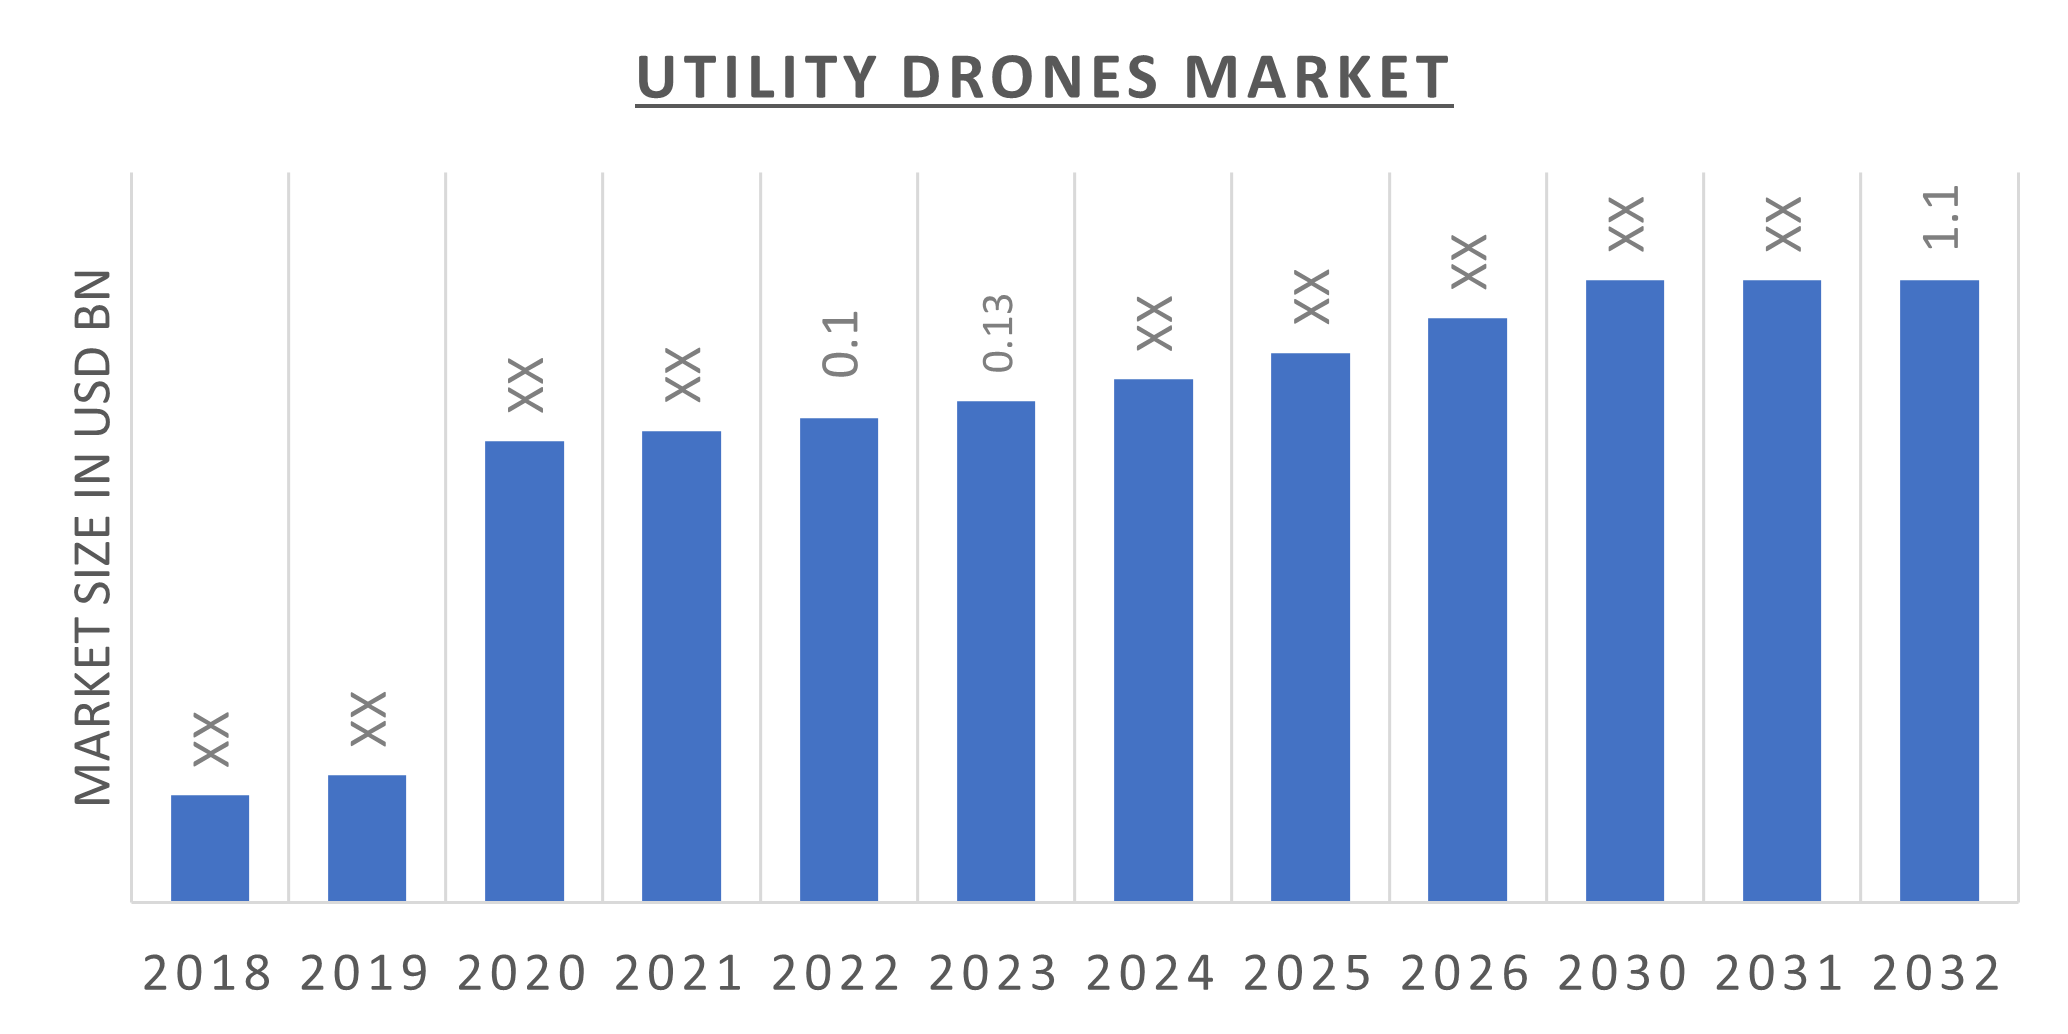 Utility Drones Market Size, Share, Growth Report, 2032